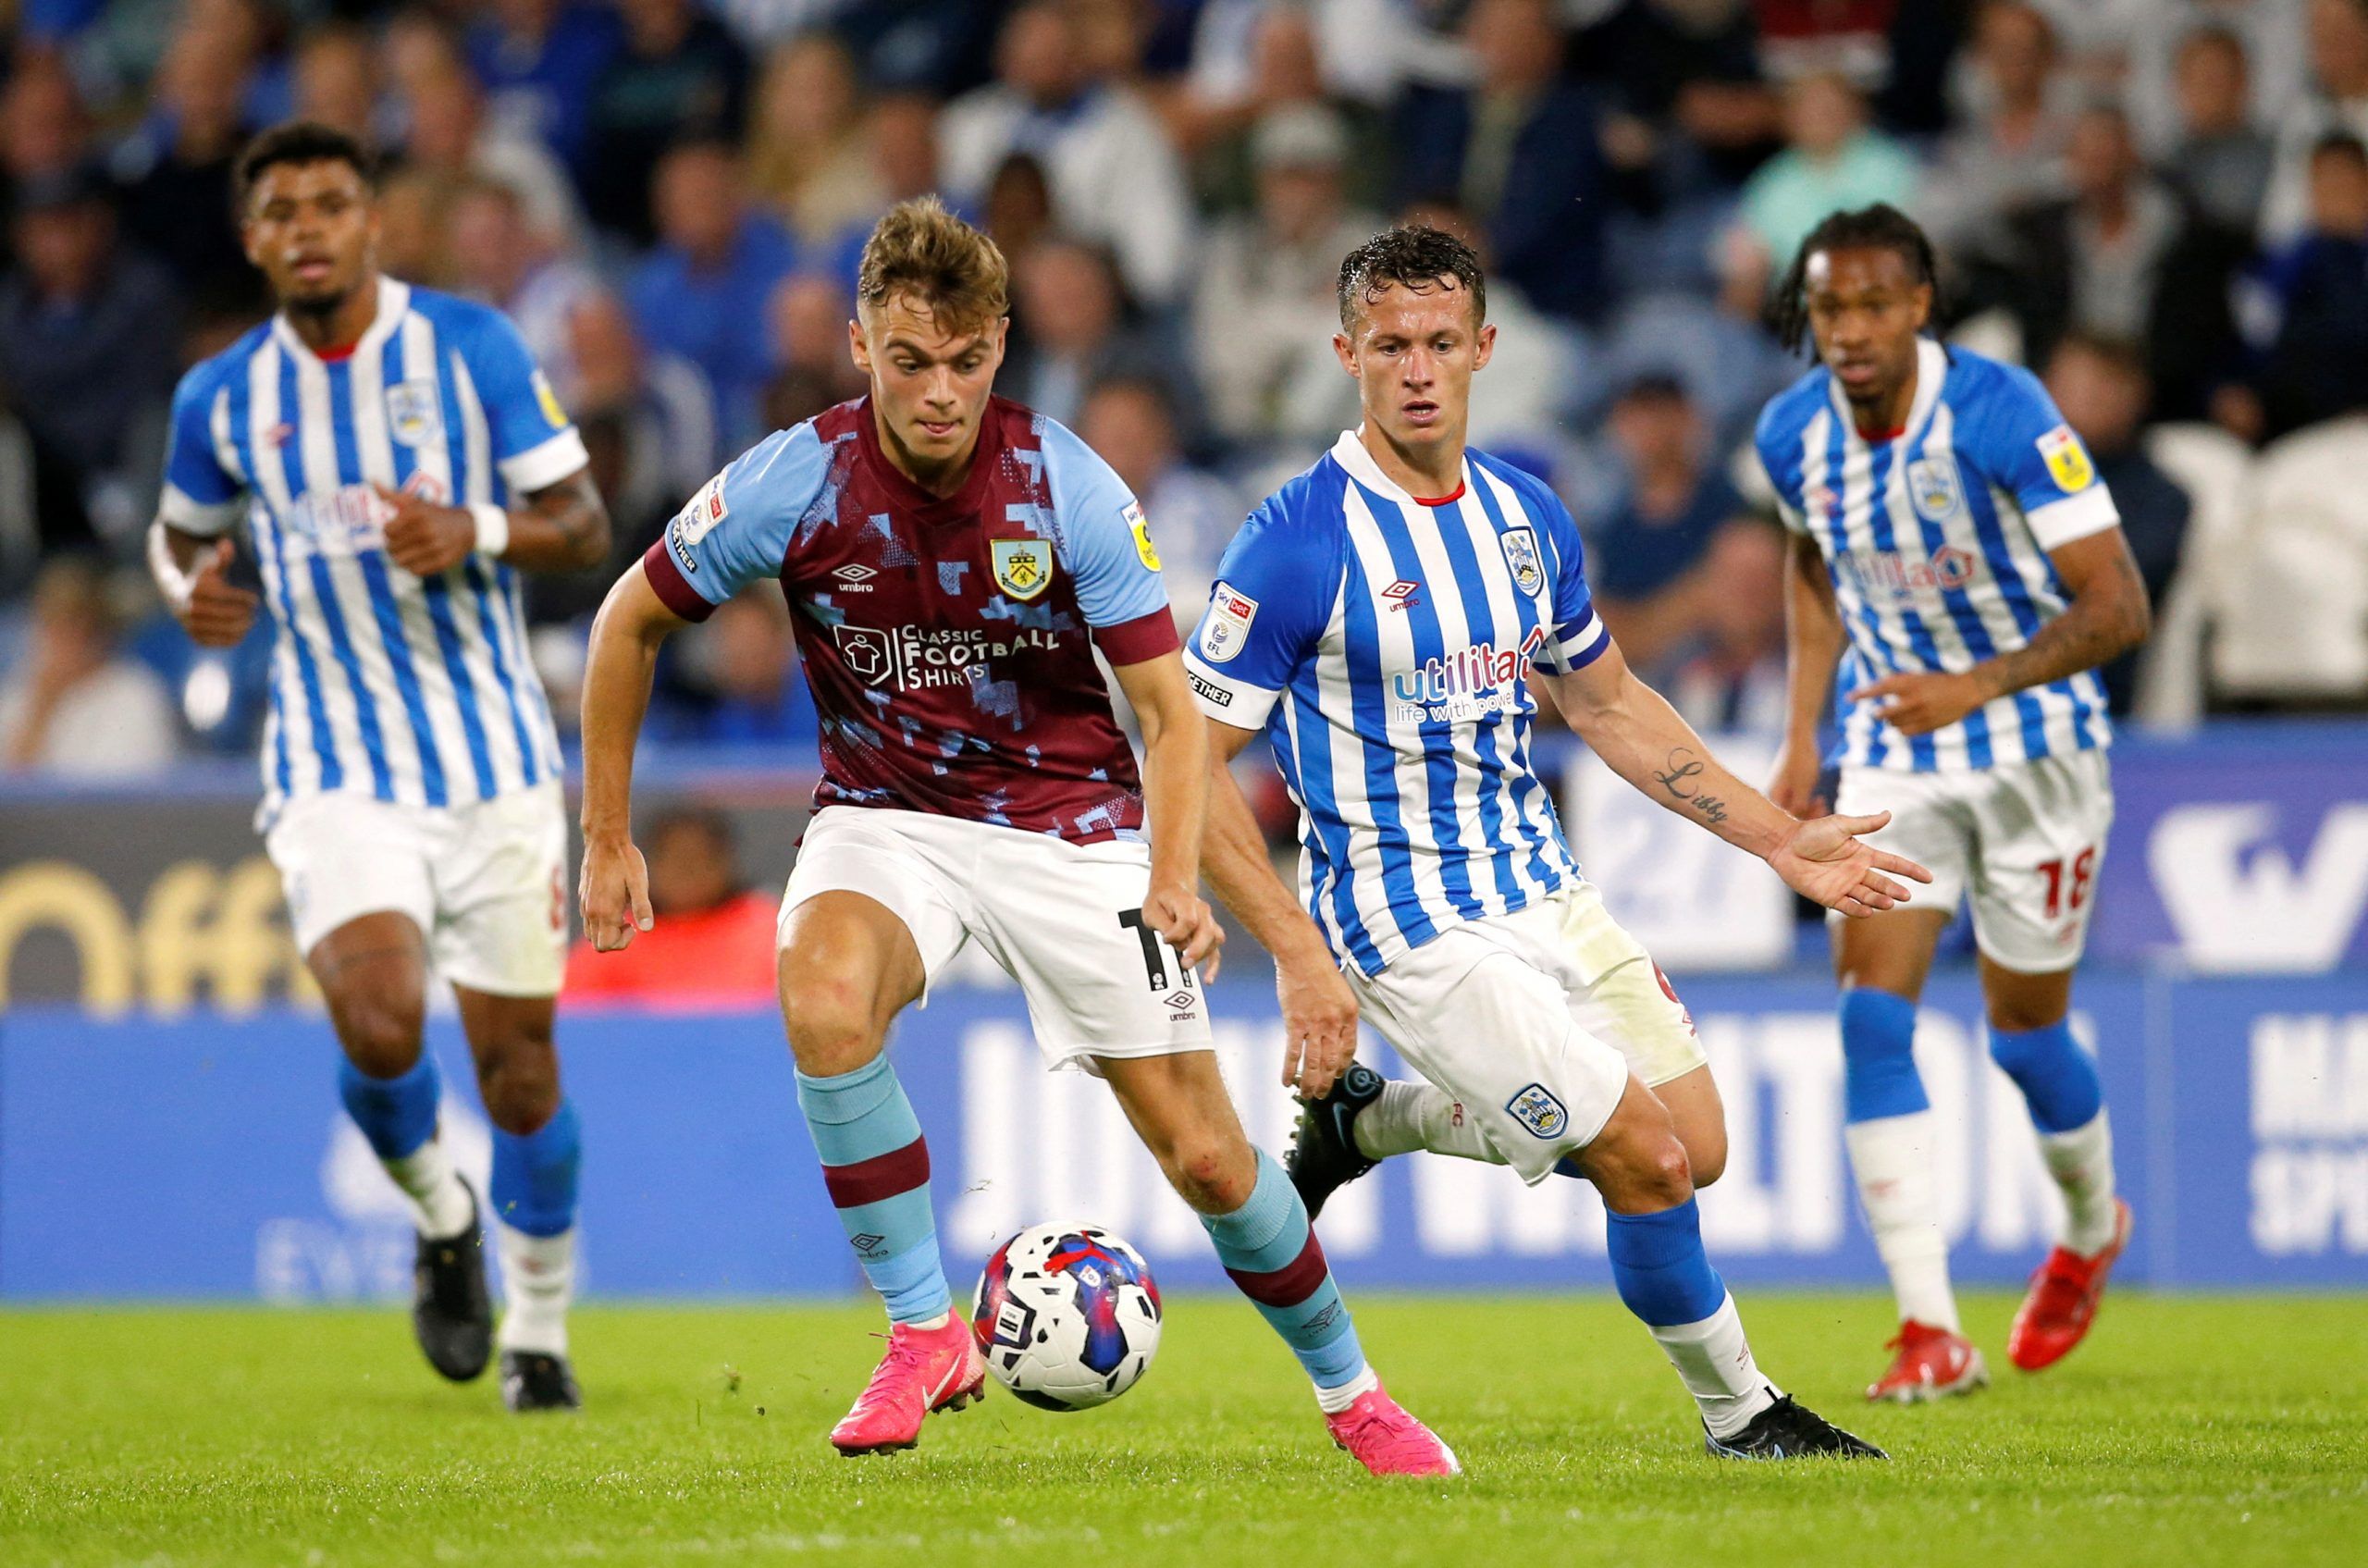 Soccer Football - Championship - Huddersfield Town v Burnley - John Smith's Stadium, Huddersfield, Britain - July 29, 2022 Burnley's Scott Twine in action with Huddersfield Town's Jonathan Hogg   Action Images/Ed Sykes  EDITORIAL USE ONLY. No use with unauthorized audio, video, data, fixture lists, club/league logos or 